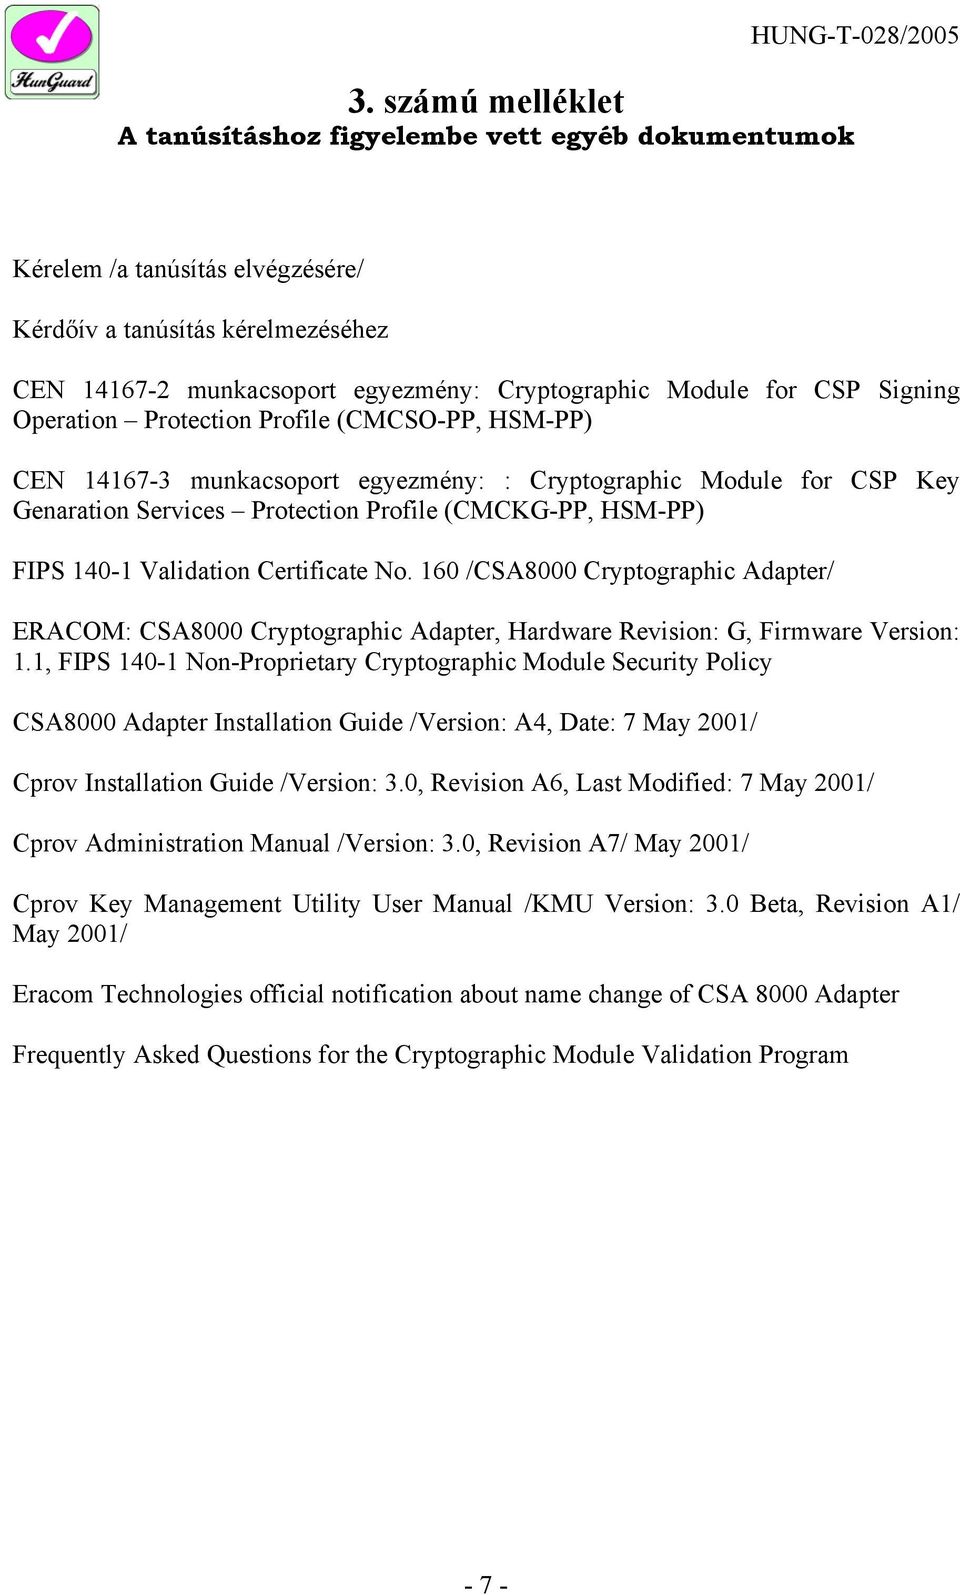 Validation Certificate No. 160 /CSA8000 Cryptographic Adapter/ ERACOM: CSA8000 Cryptographic Adapter, Hardware Revision: G, Firmware Version: 1.